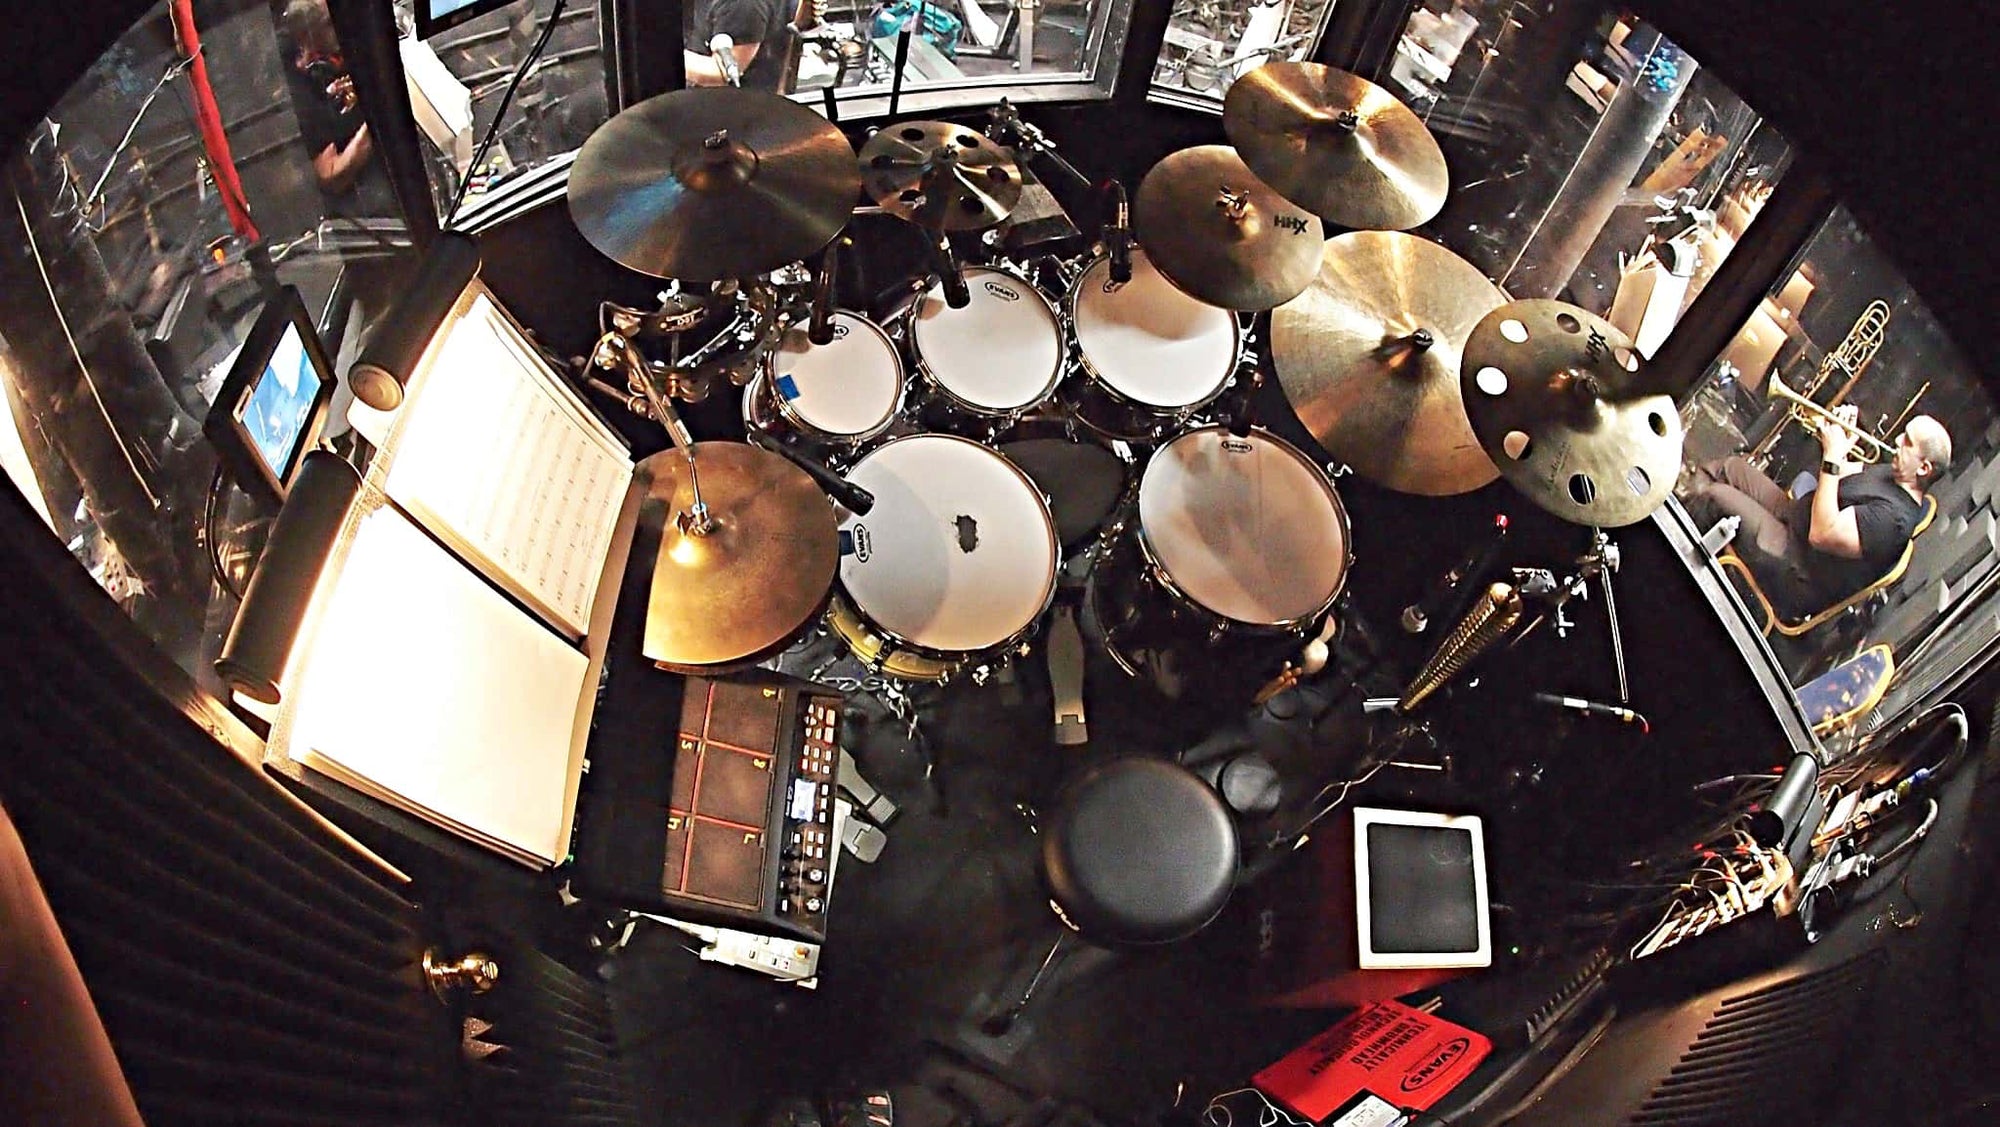 Howard Joines’ setup for the Broadway production of Groundhog Day at the August Wilson Theatre.